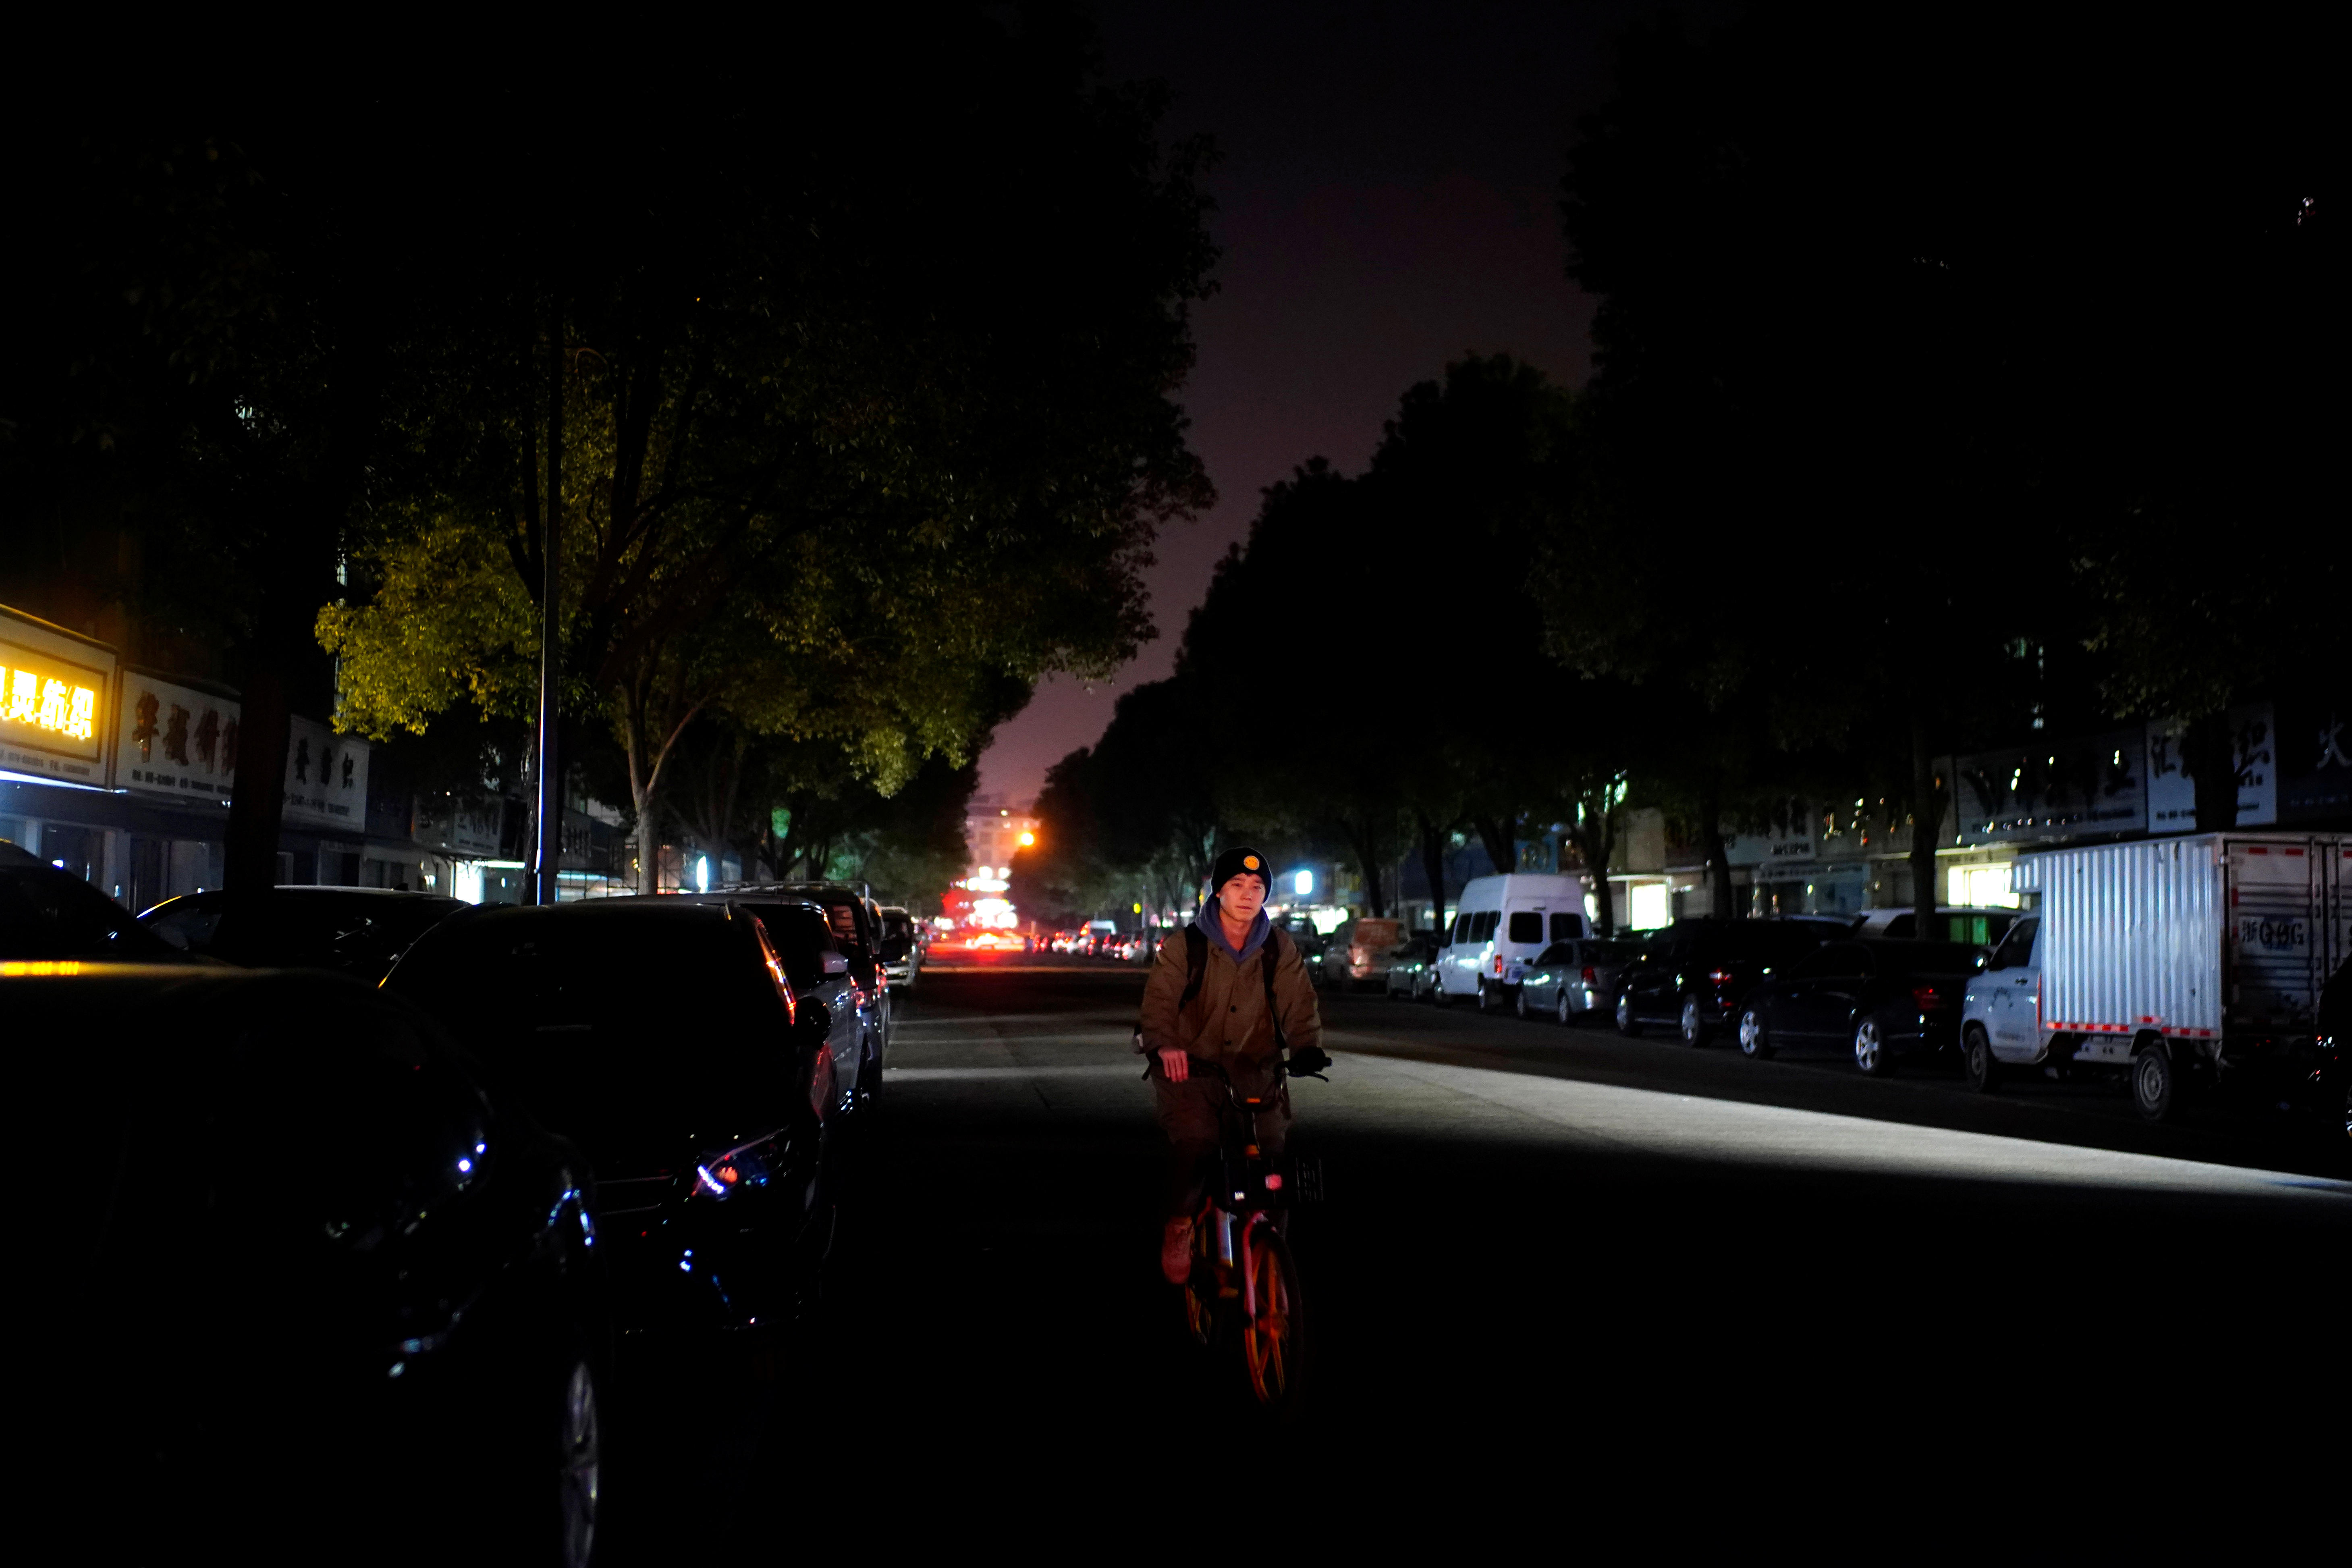 Man rides a bicycle on a street with the lighting system partially off in Yiwu